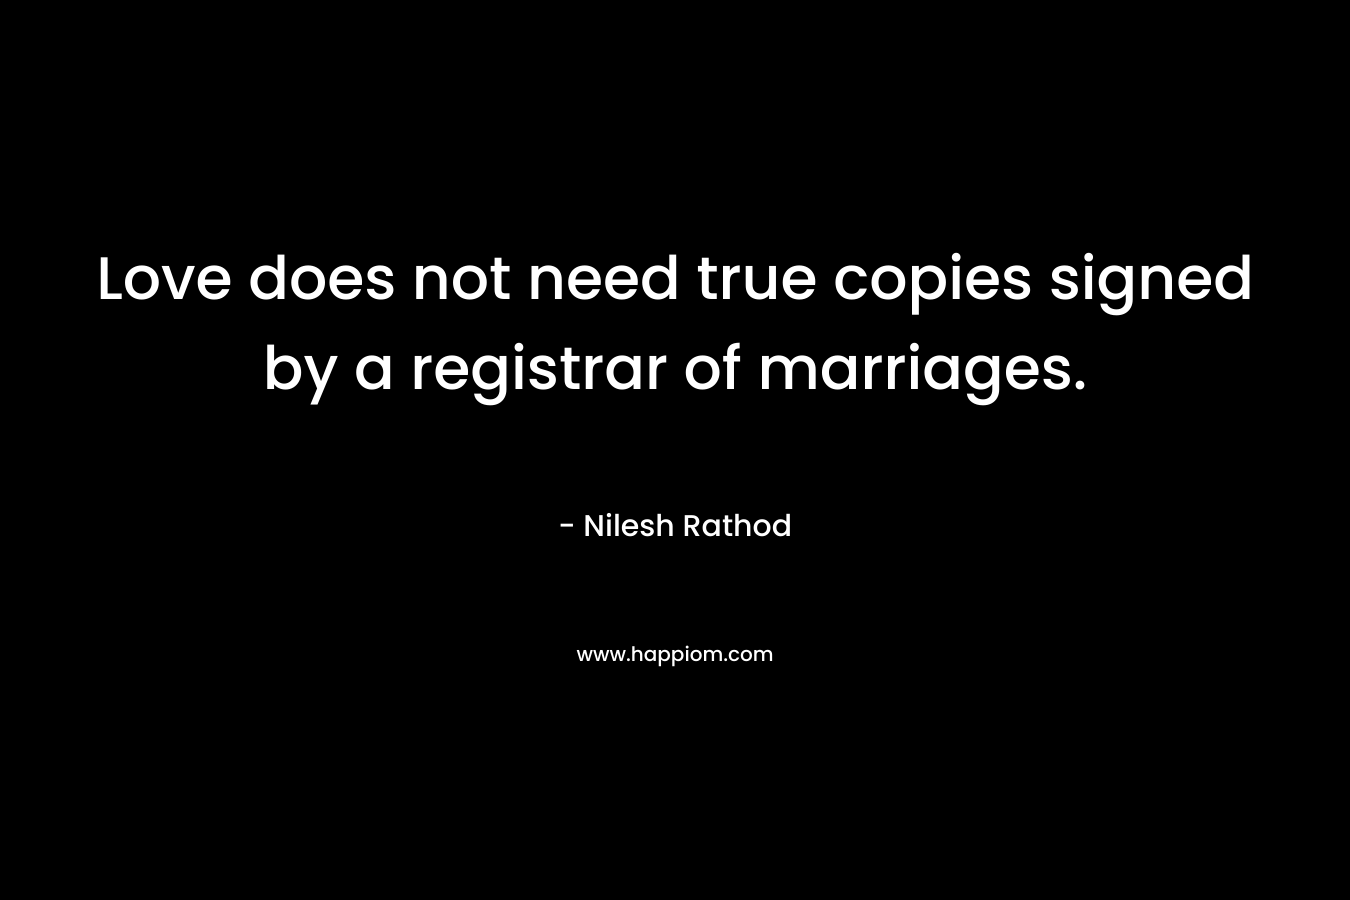 Love does not need true copies signed by a registrar of marriages. – Nilesh Rathod